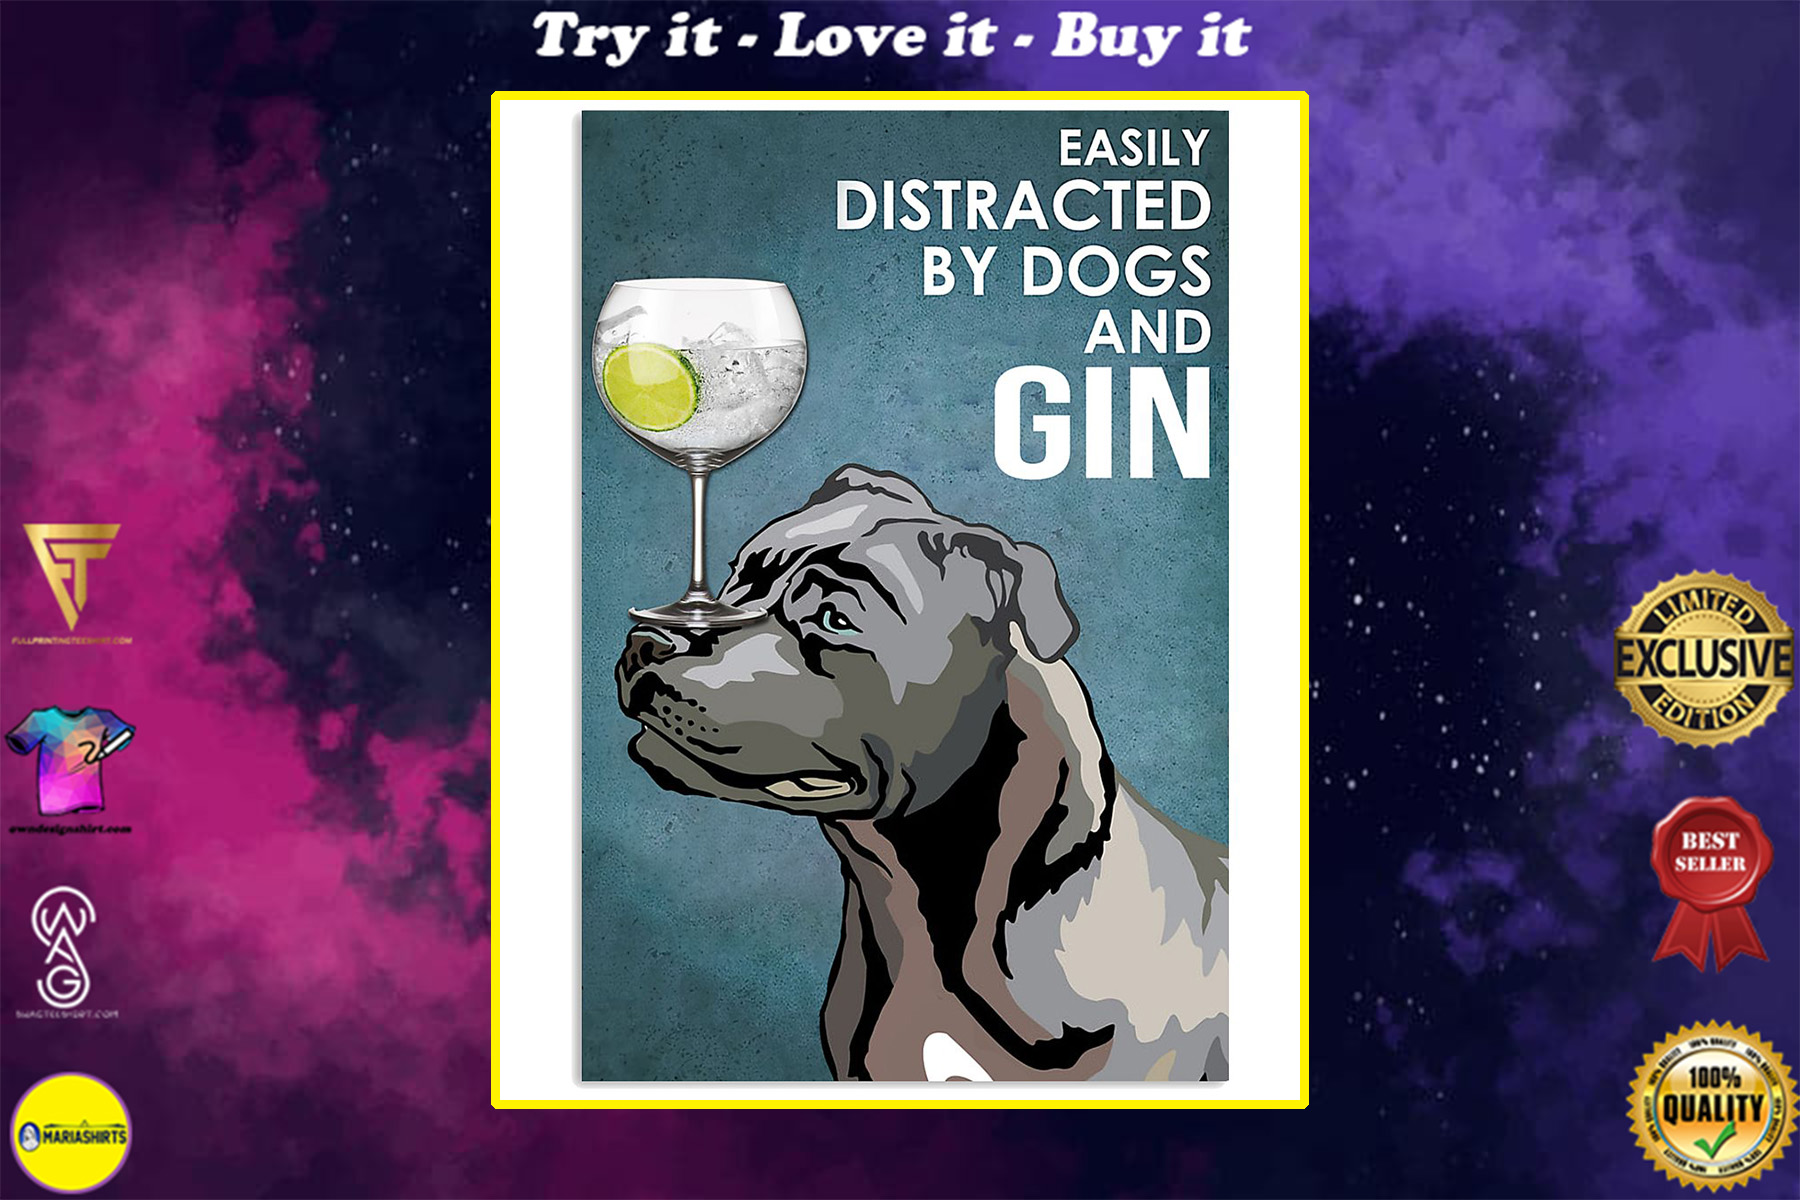 dog blue staffy easily distracted by dogs and gin poster